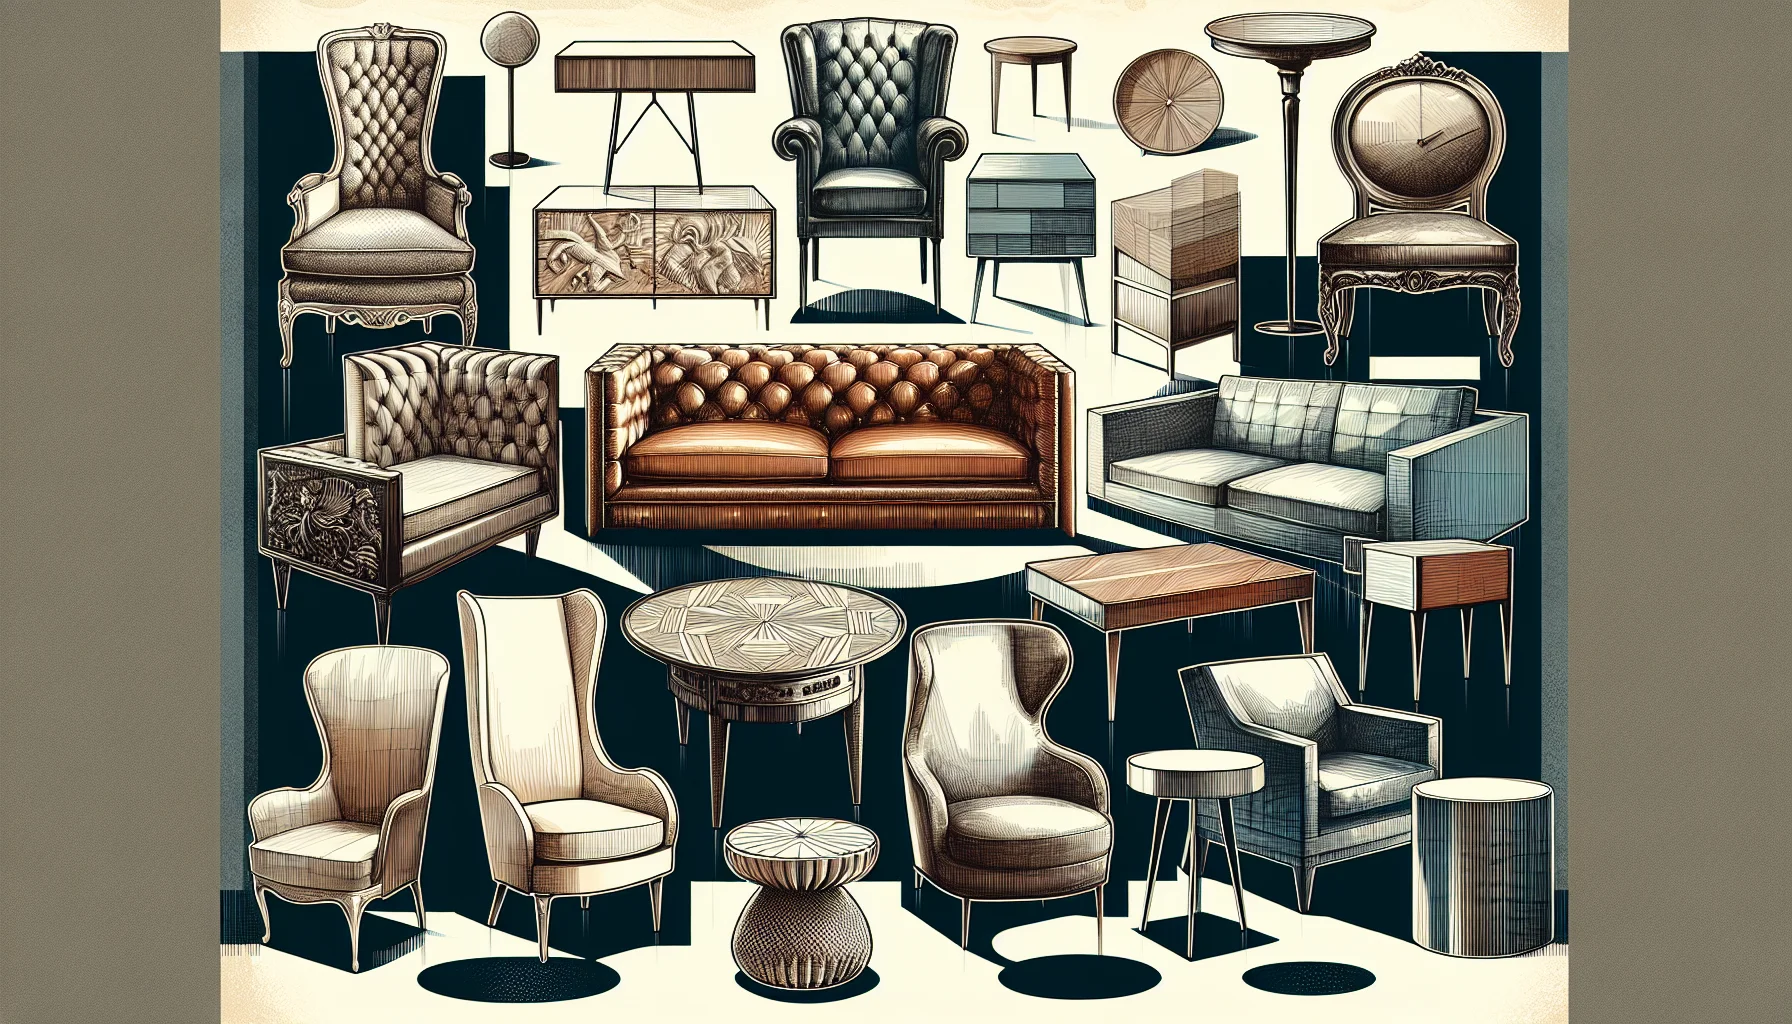 Stylish furniture pieces in a variety of designs